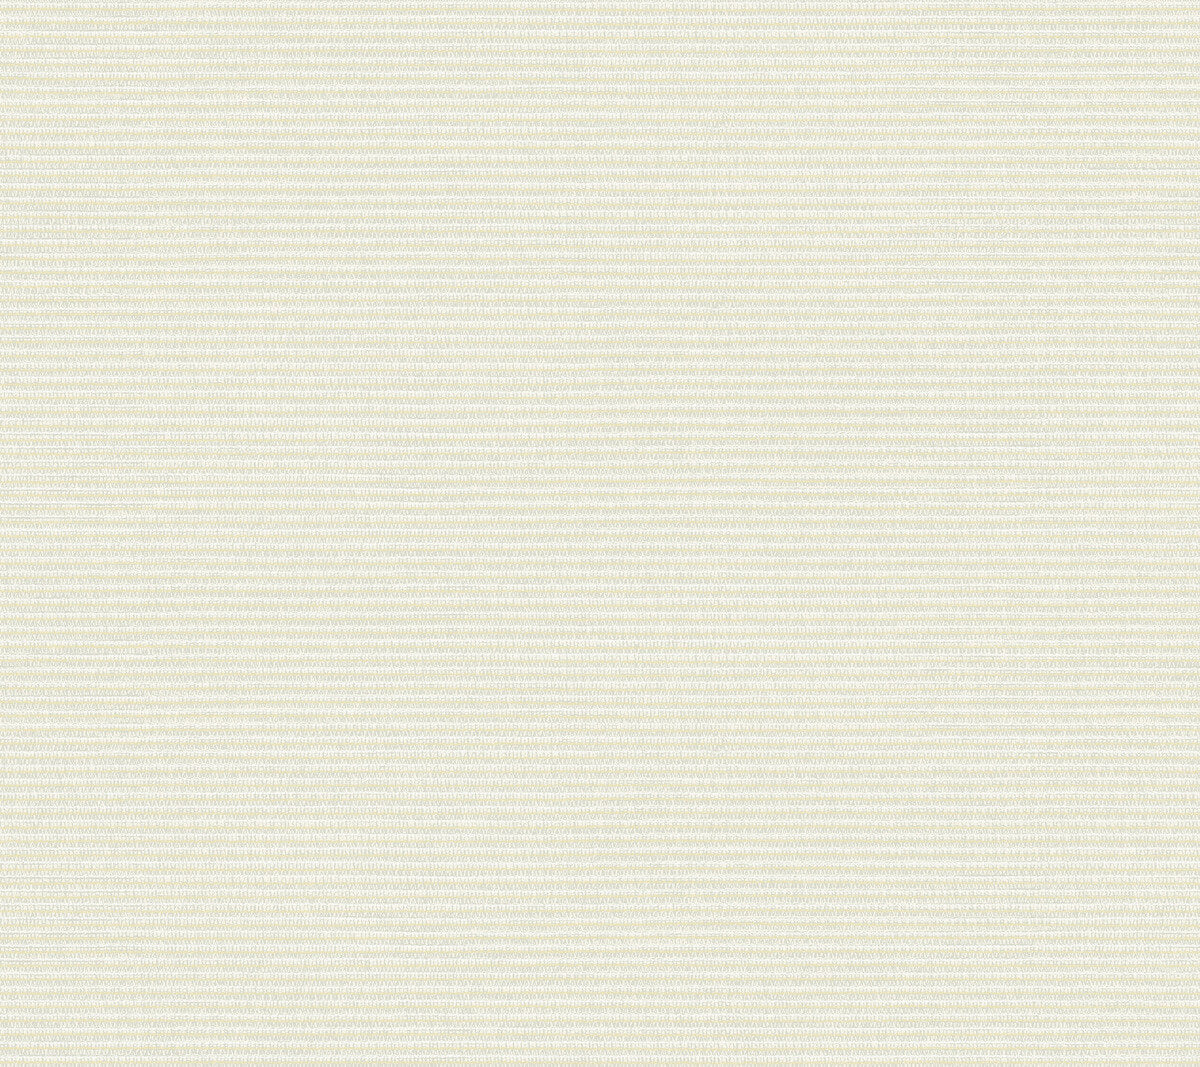 Tropics Resource Library Boucle Wallpaper - Off White